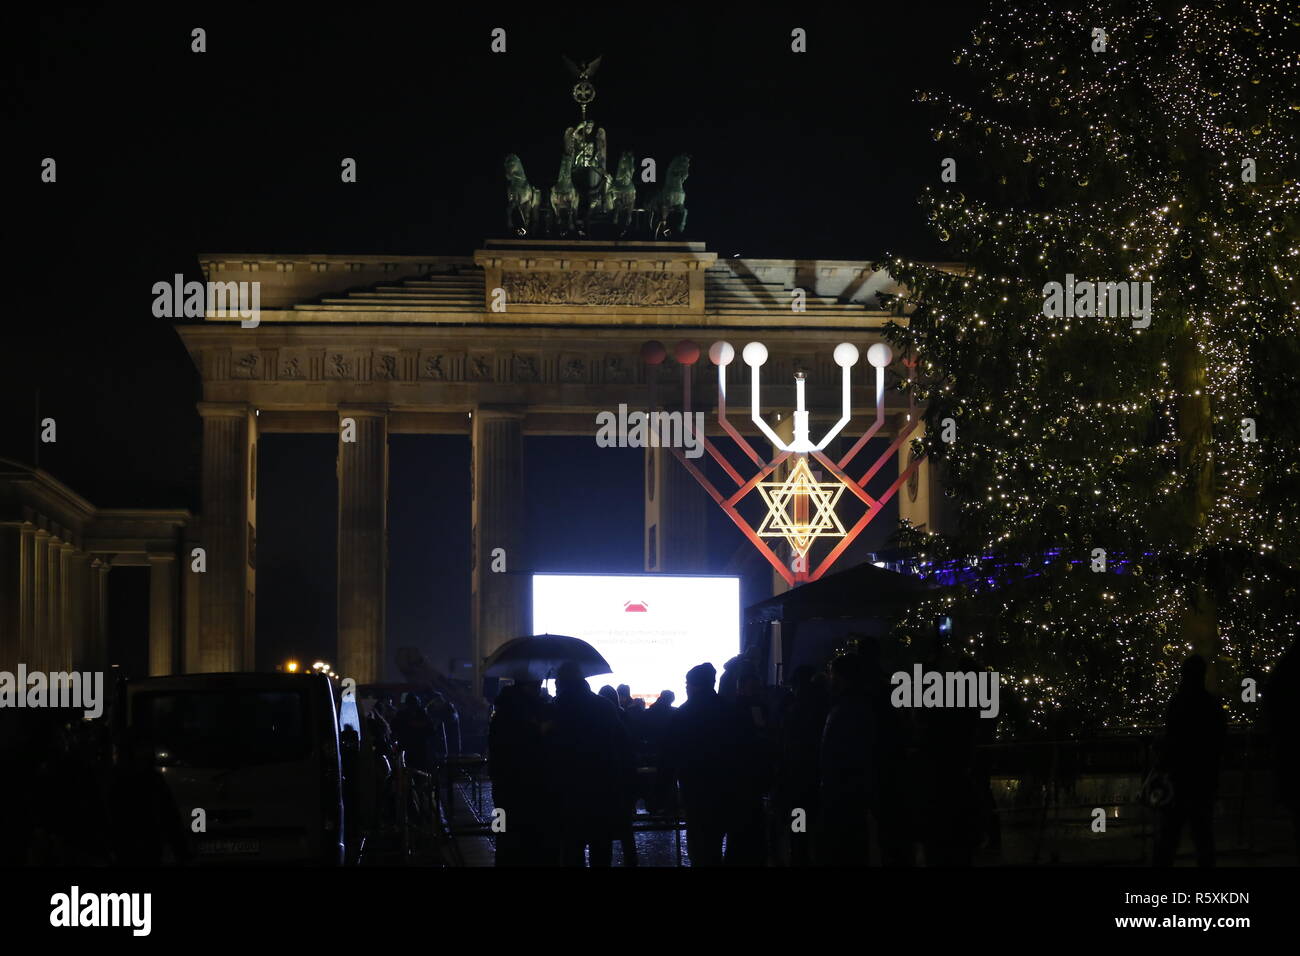 Berlin, Germany. 02nd Dec, 2018. Hanukkah lamp in front of the Brandenburger Tor. On Sunday evening, December 2, 2018, Hanukkah will begin this year. The Jewish Education Center Chabad Berlin begins this eight-day Jewish festival of lights at the Brandenburger Tor. Credit: SAO Struck/Alamy Live News Stock Photo